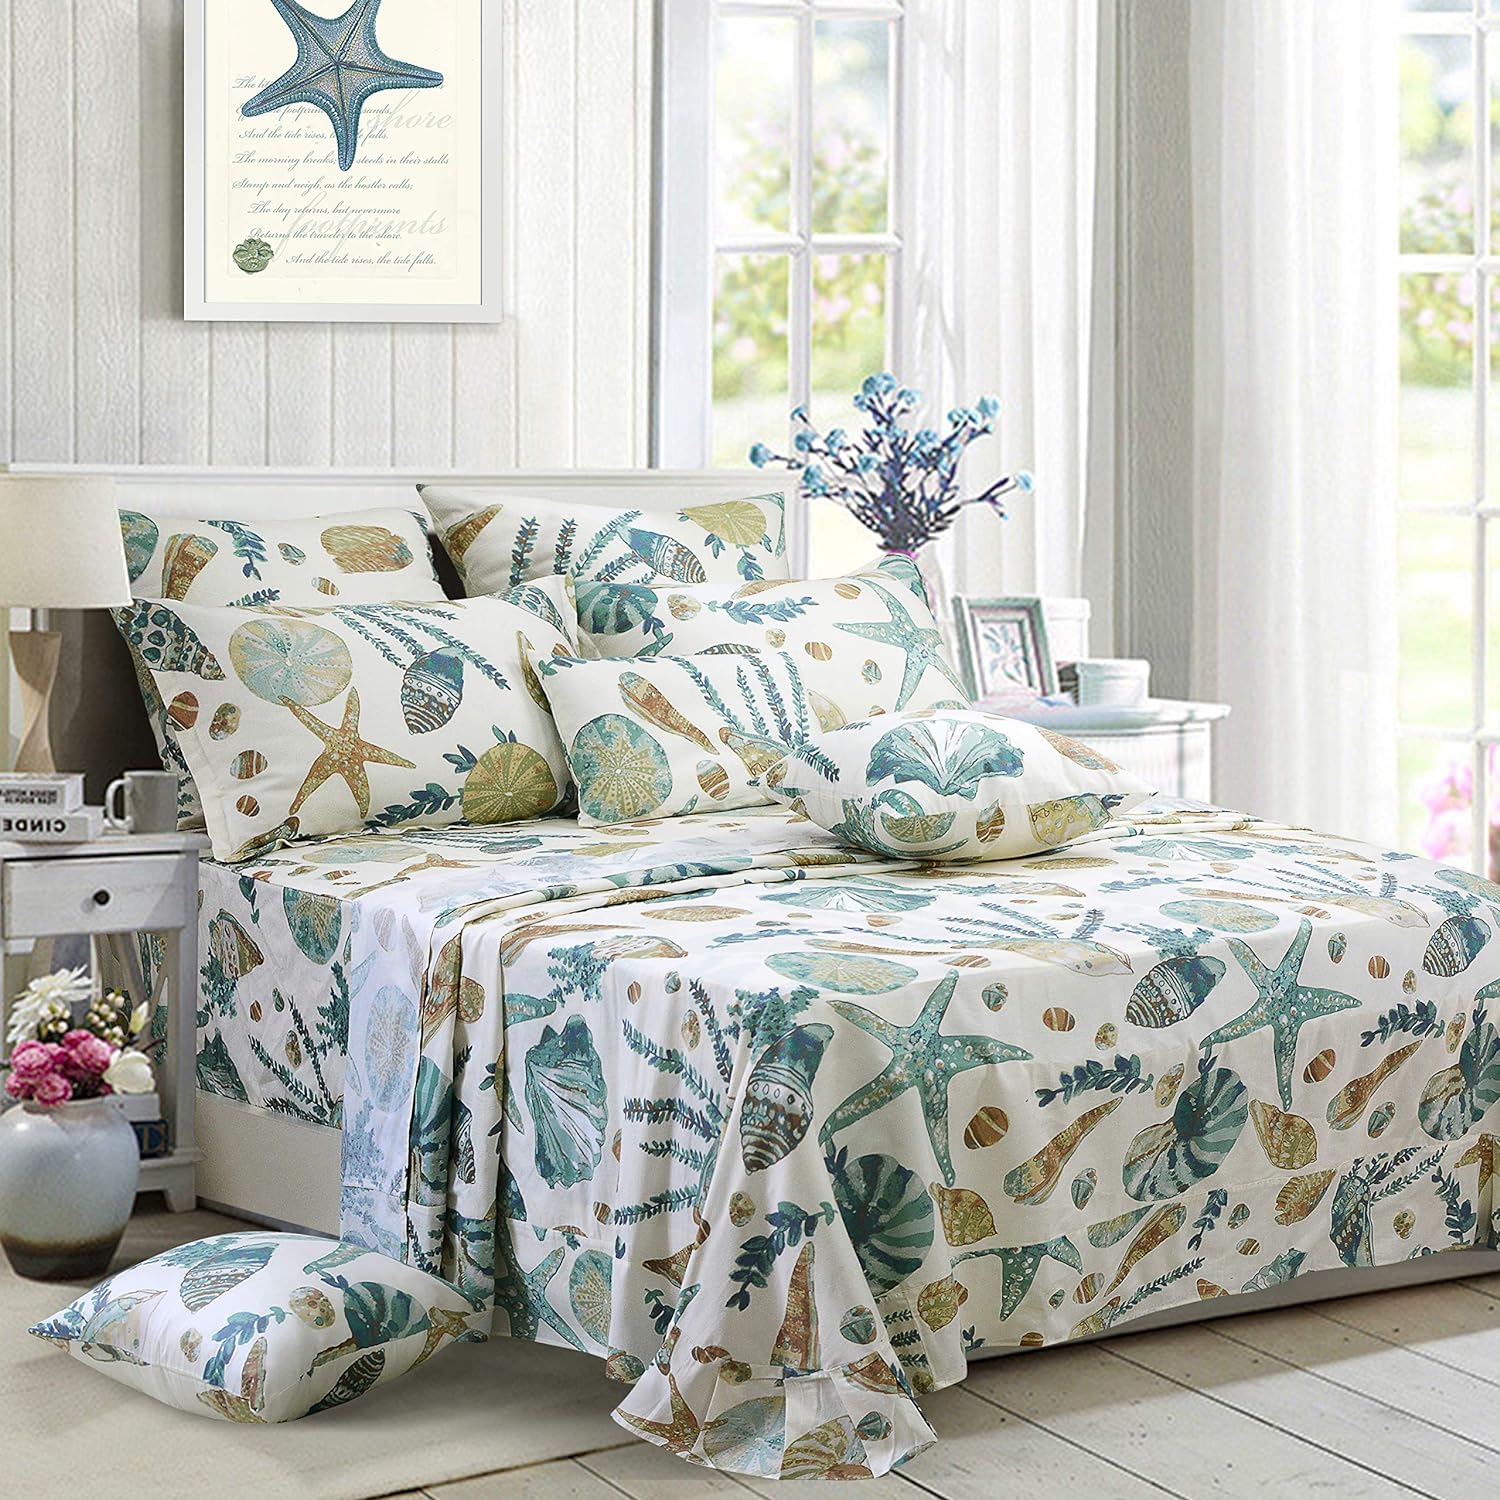 FADFAY Sheet Set Queen Beach Themed Bedding Sets 100% Cotton Super Soft Coastal Bedding White Teal Seashells and Starfish Nautical Bedding with Deep Pocket Fitted Sheet 4-Pieces Queen Size